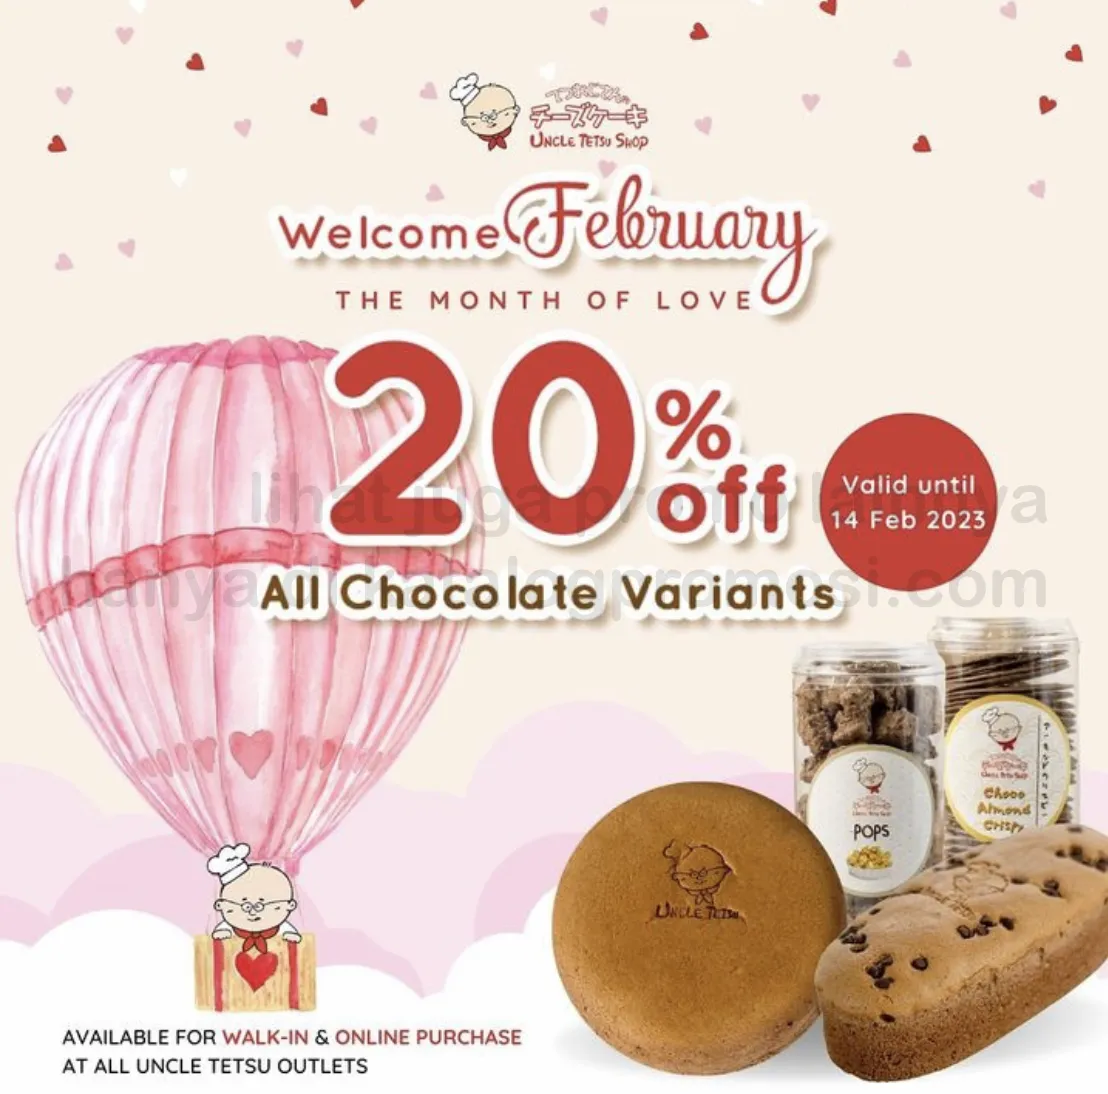 Promo UNCLE TETSU DISCOUNT 20% OFF for all Chocolate variants